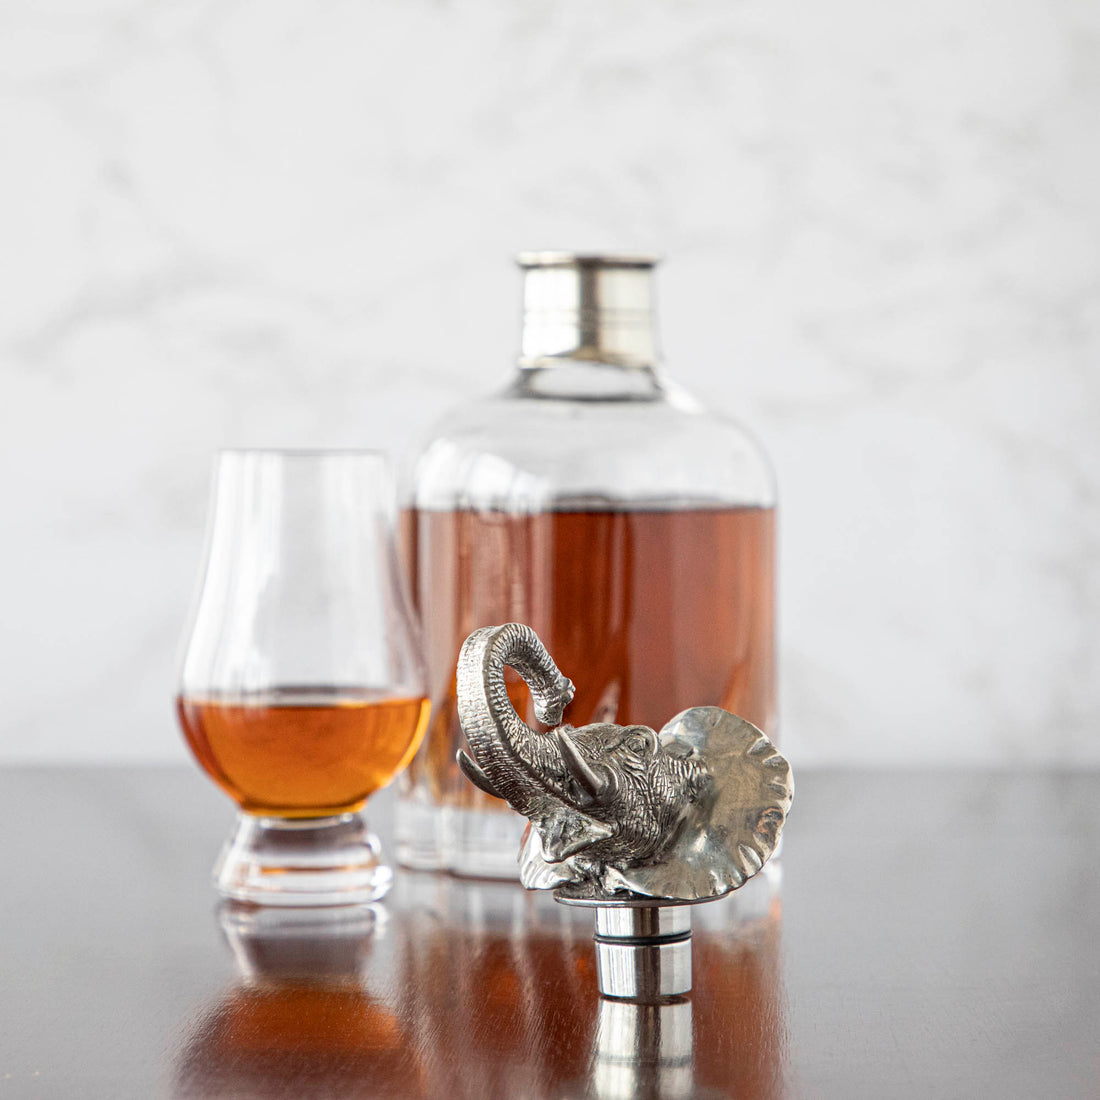 An Menagerie elephant-shaped bottle stopper on a table in front of a glass of whisky and a Menagerie crystal decanter.